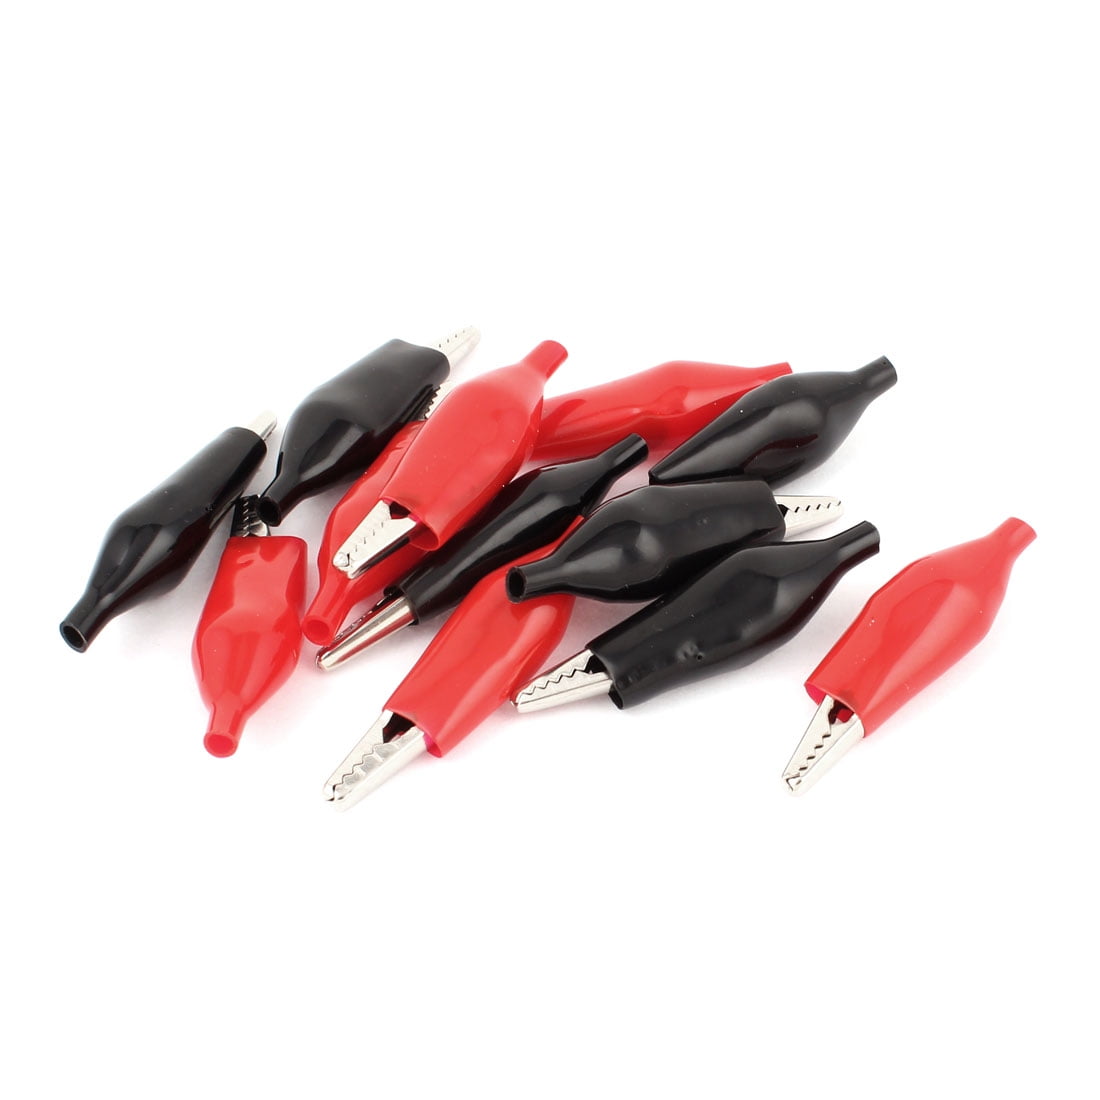 20 x Crocodile Alligator Clips Connectors for Test Leads Red and Black 35mm 